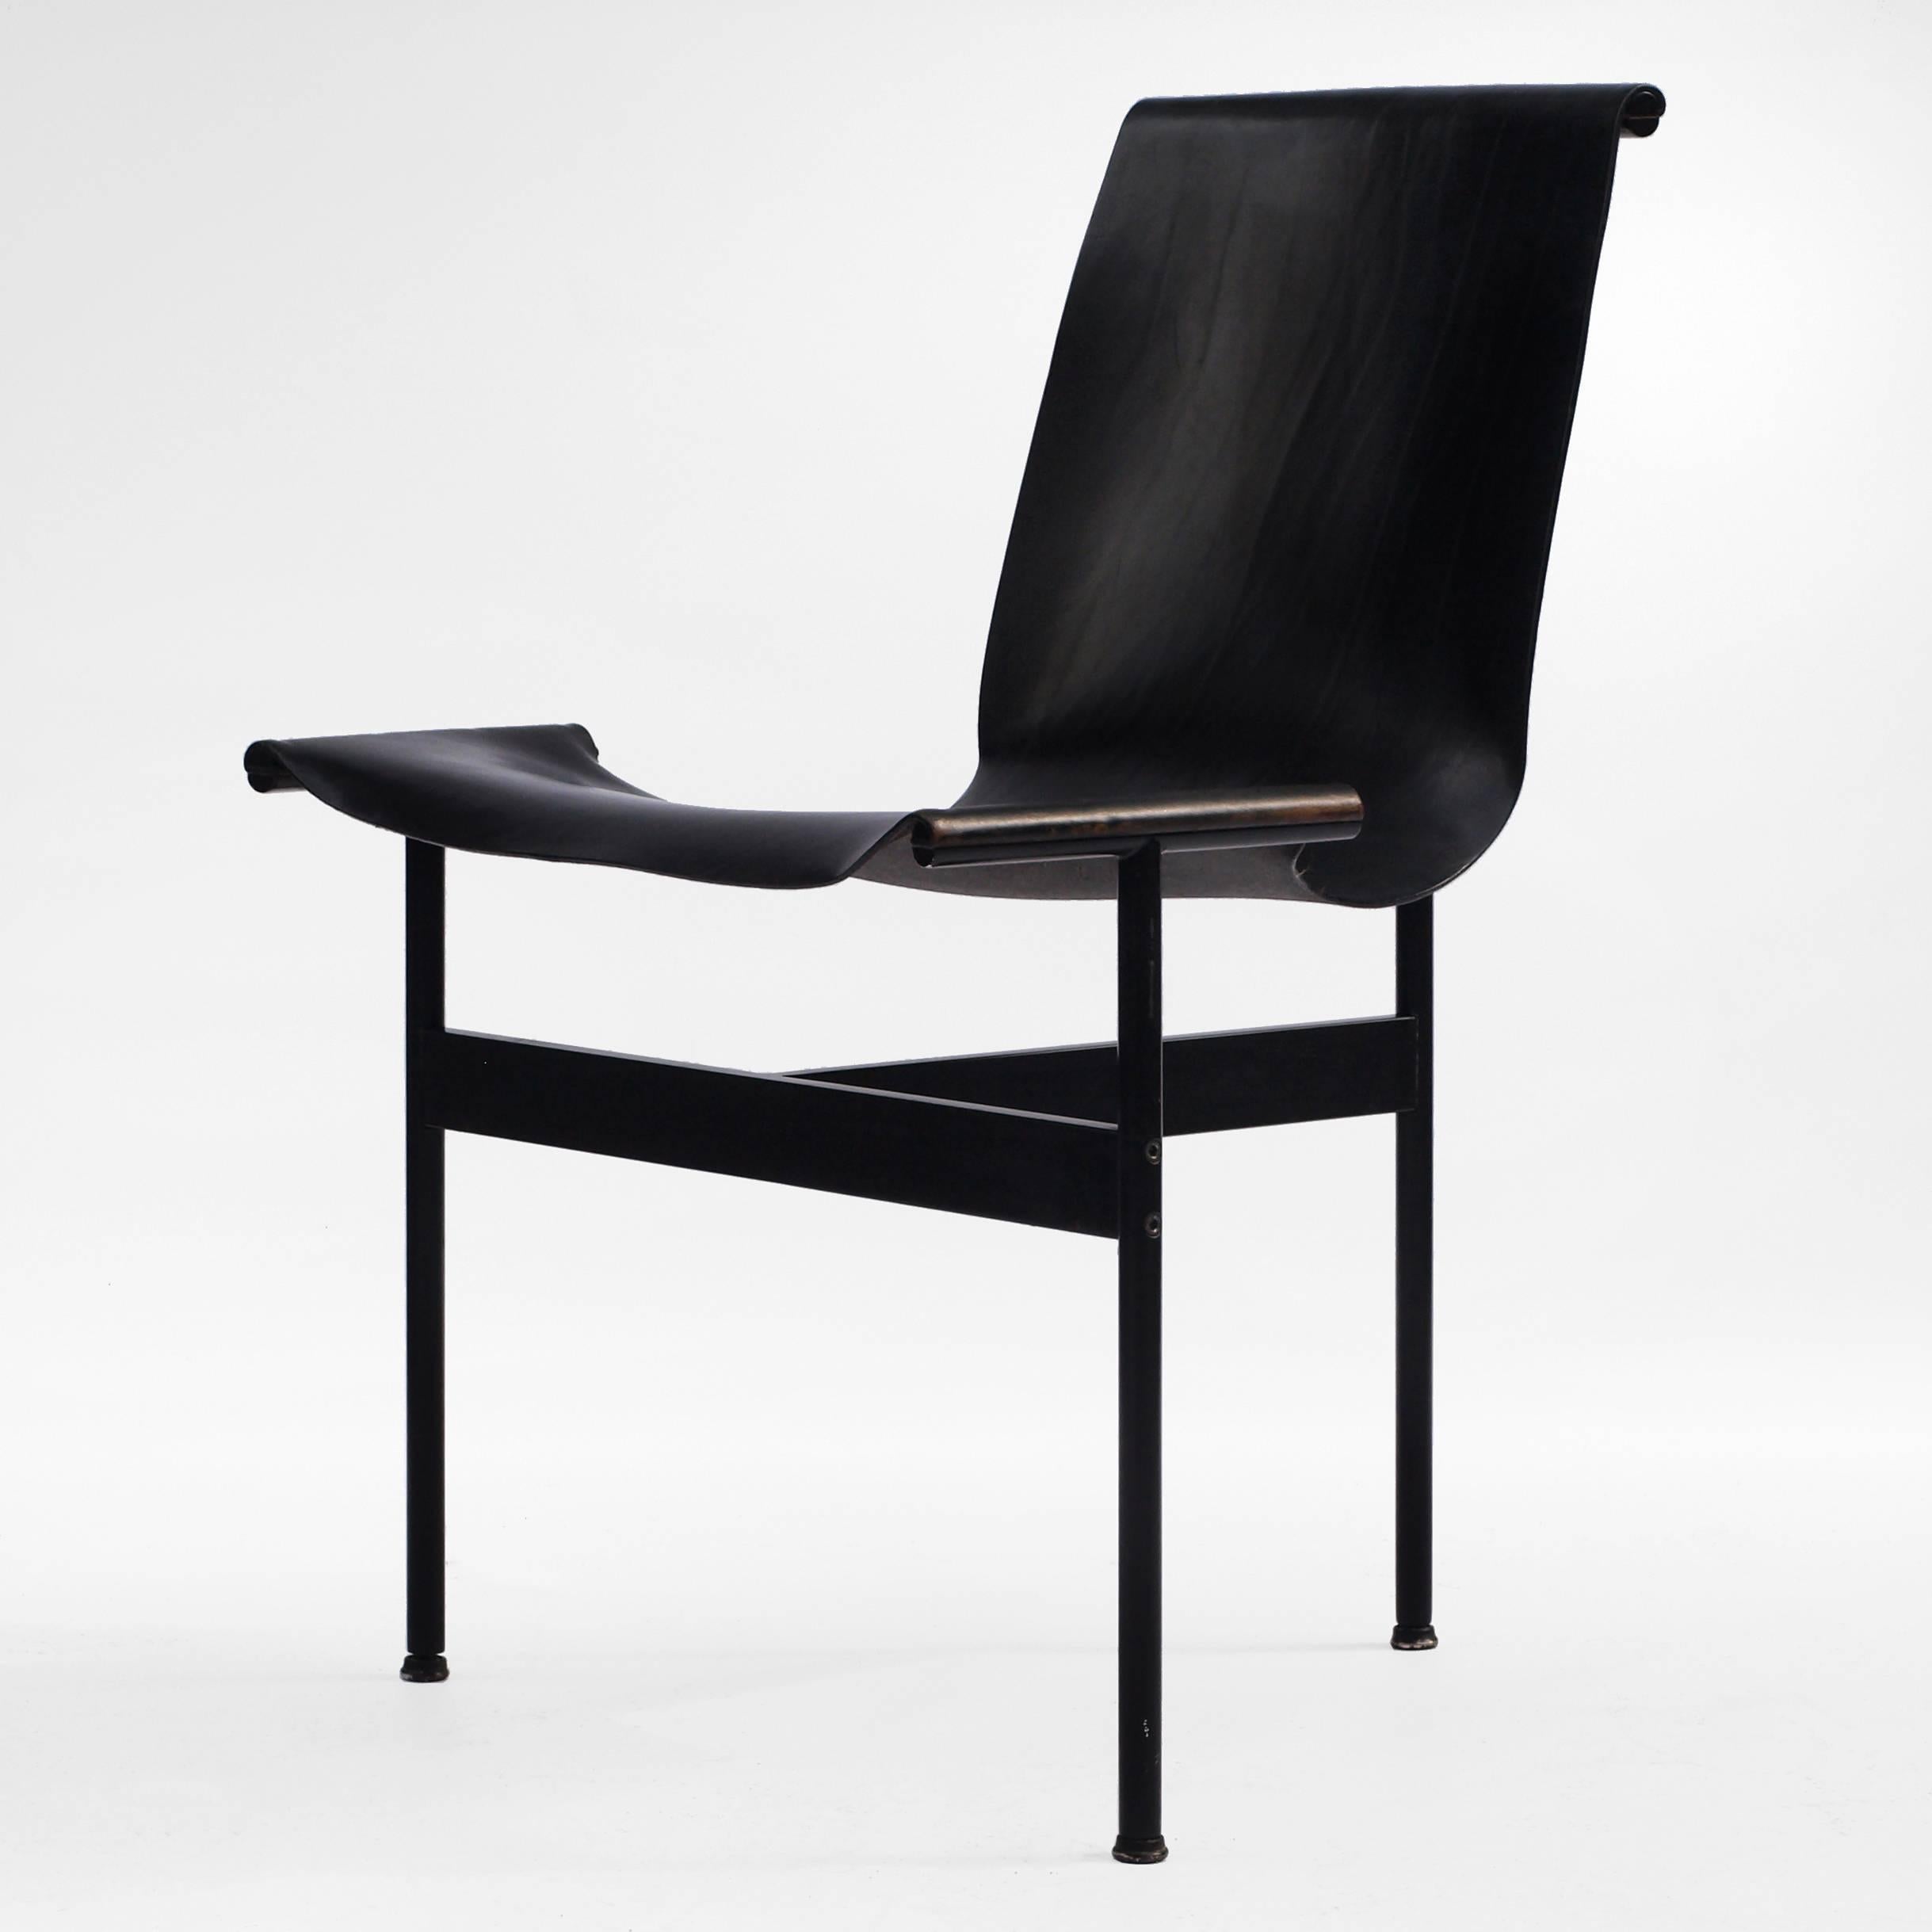 Steel Set of Six Black T-Chairs by William Katavolos for Laverne International